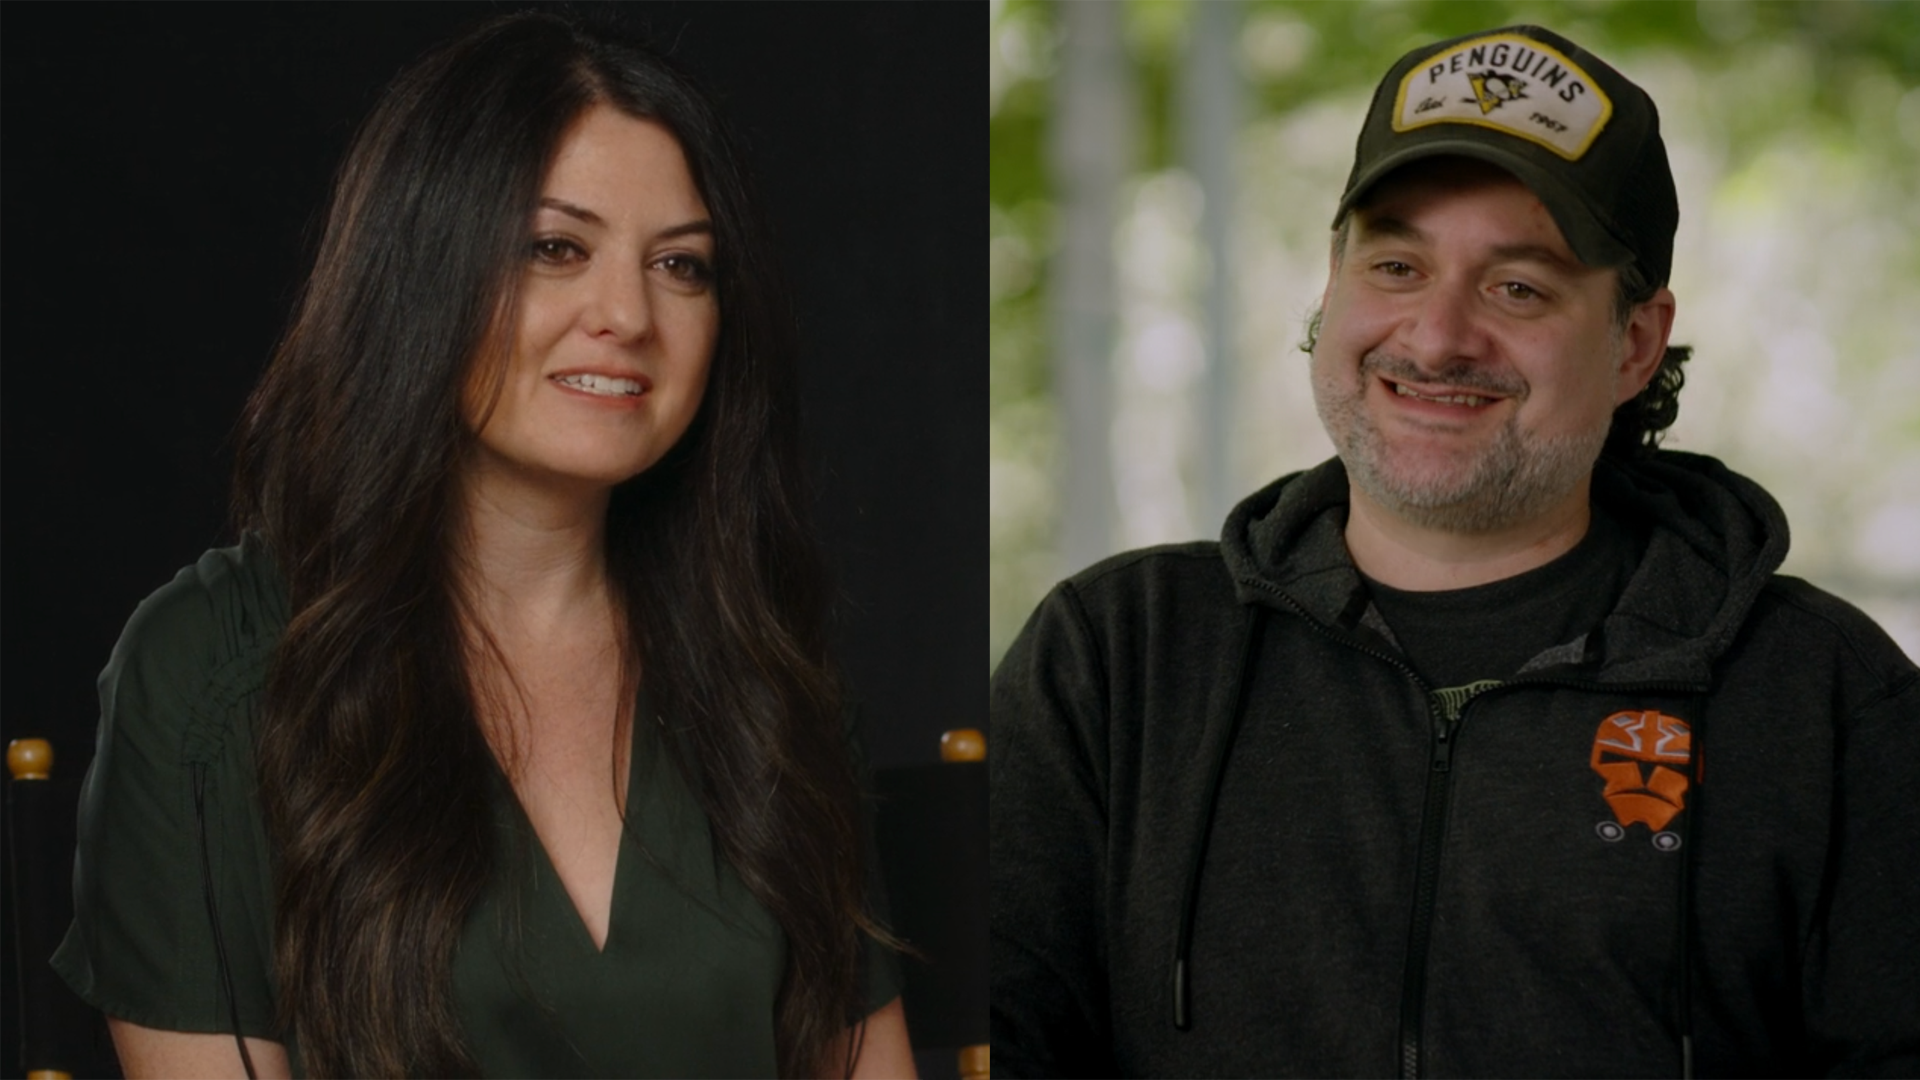 Carrie Beck and Dave Filoni take on new positions overseeing Star Wars